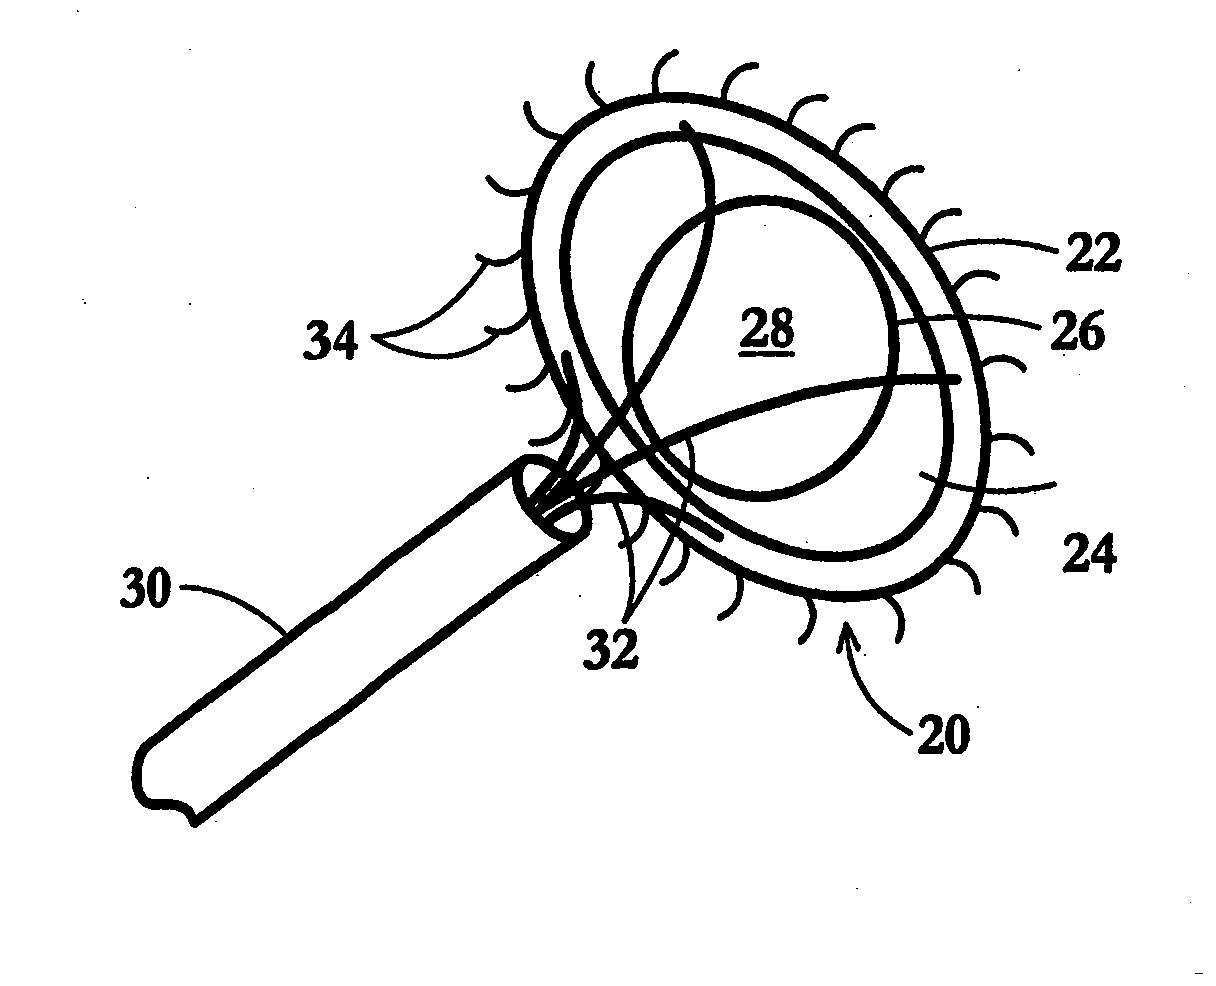 Device and Method for Temporary or Permanent Suspension of an Implantable Scaffolding Containing an Orifice for Placement of a Prosthetic or Bio-Prosthetic Valve